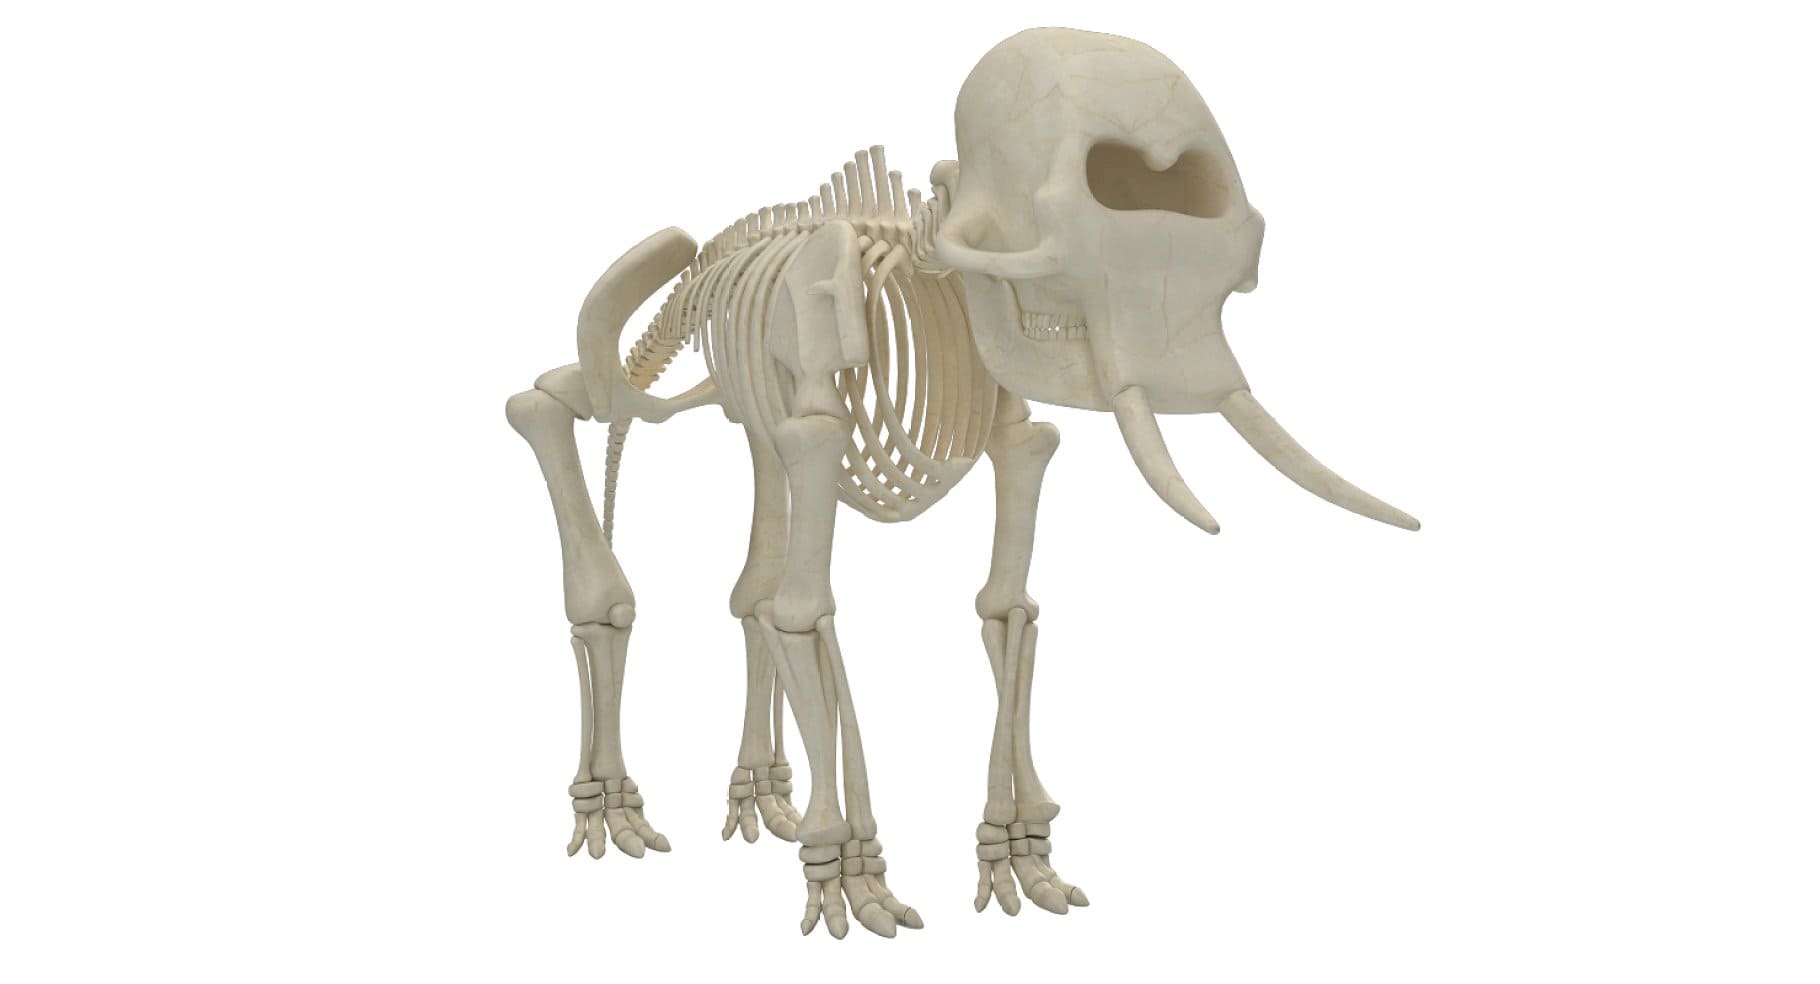 Image of the skeleton of an elephant from the right side.